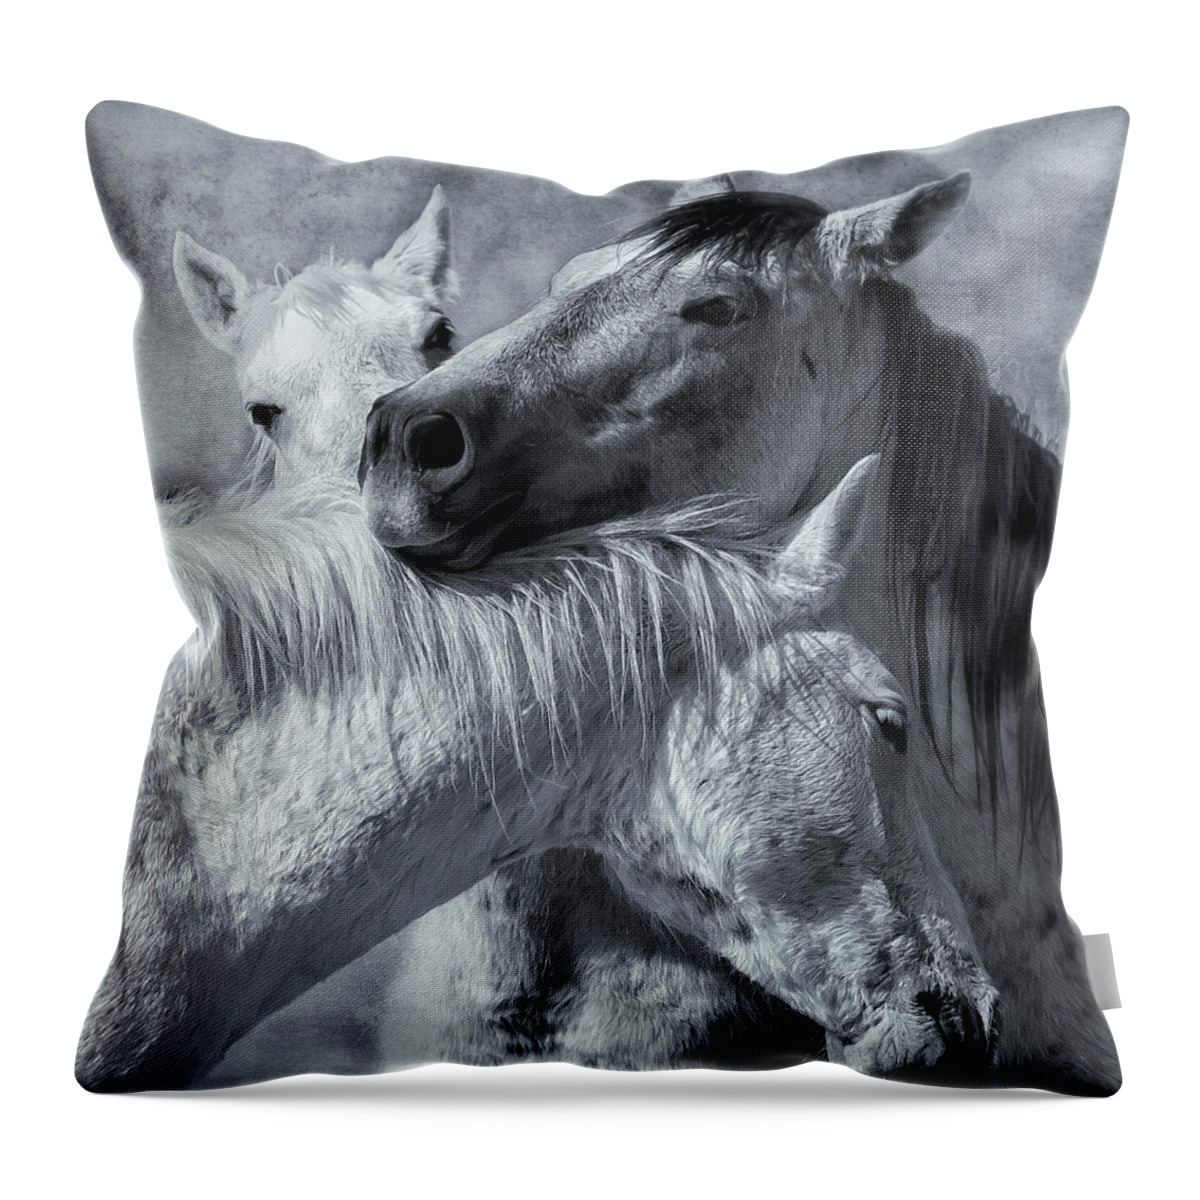 Wild Horses Throw Pillow featuring the photograph Surrounded by Love BW by Belinda Greb